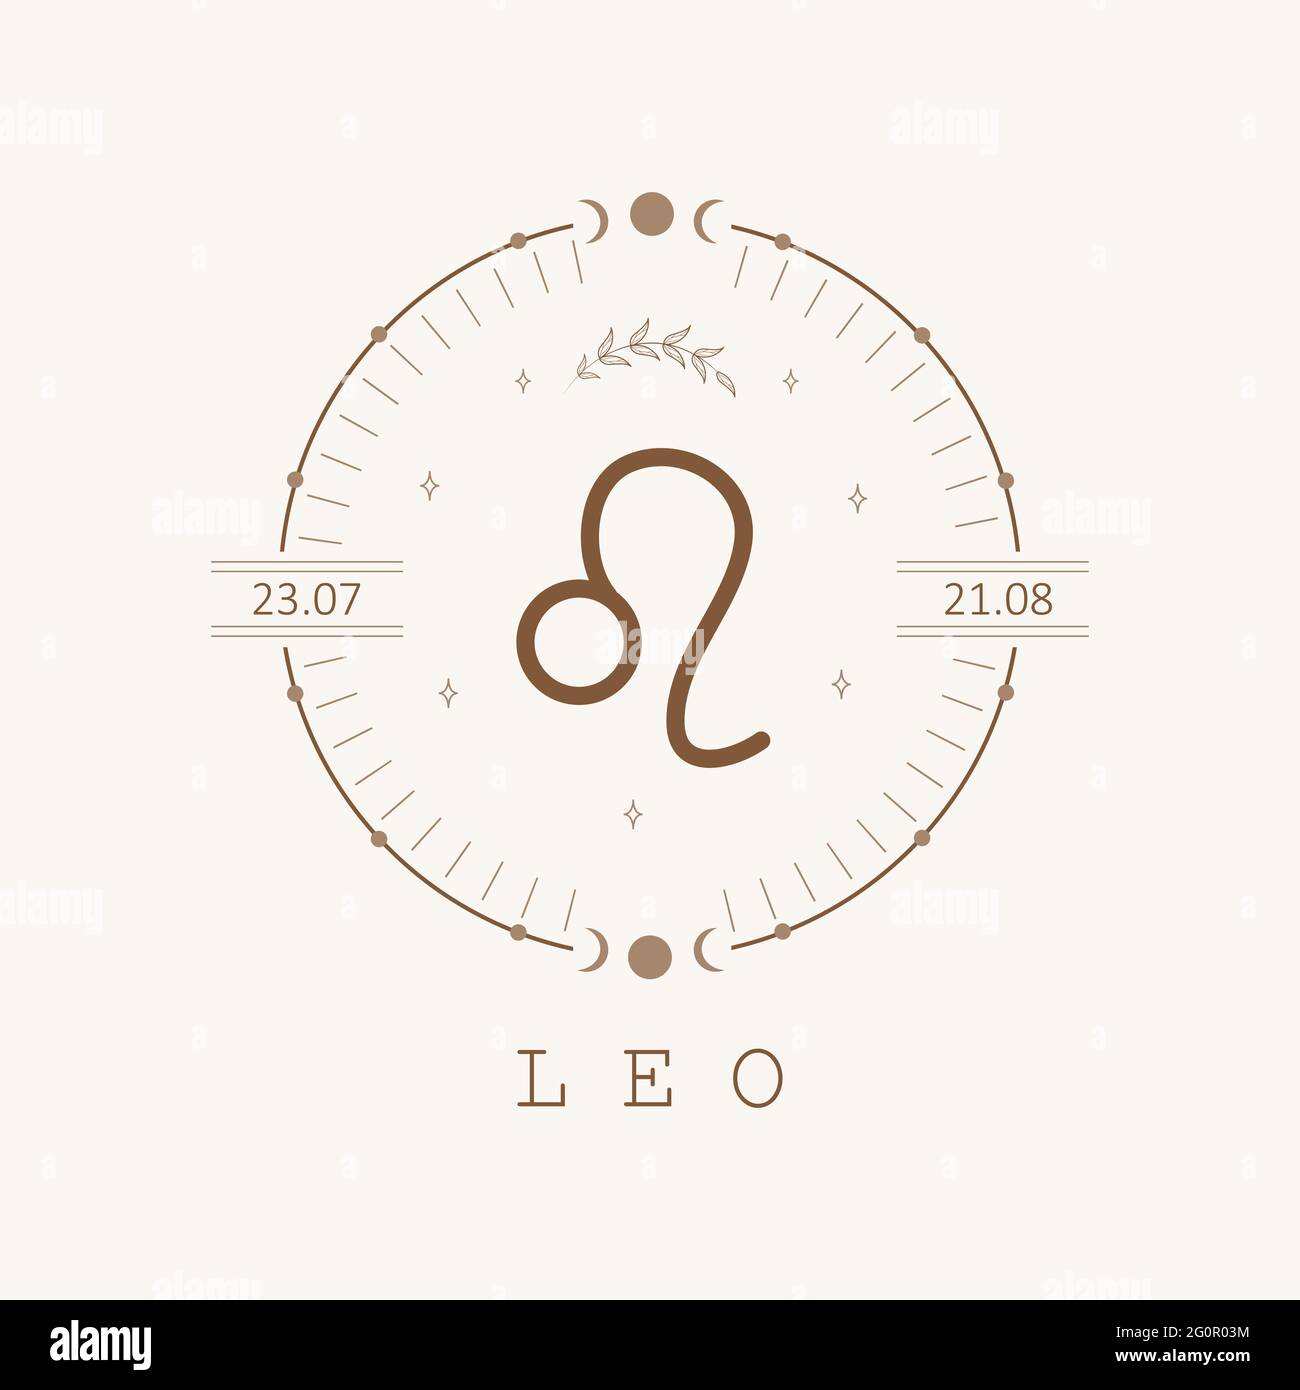 Leo. Zodiac sign in boho style. Astrological icon isolated on white background. Mystery and esoteric. Horoscope logo vector illustration. Spiritual Stock Vector